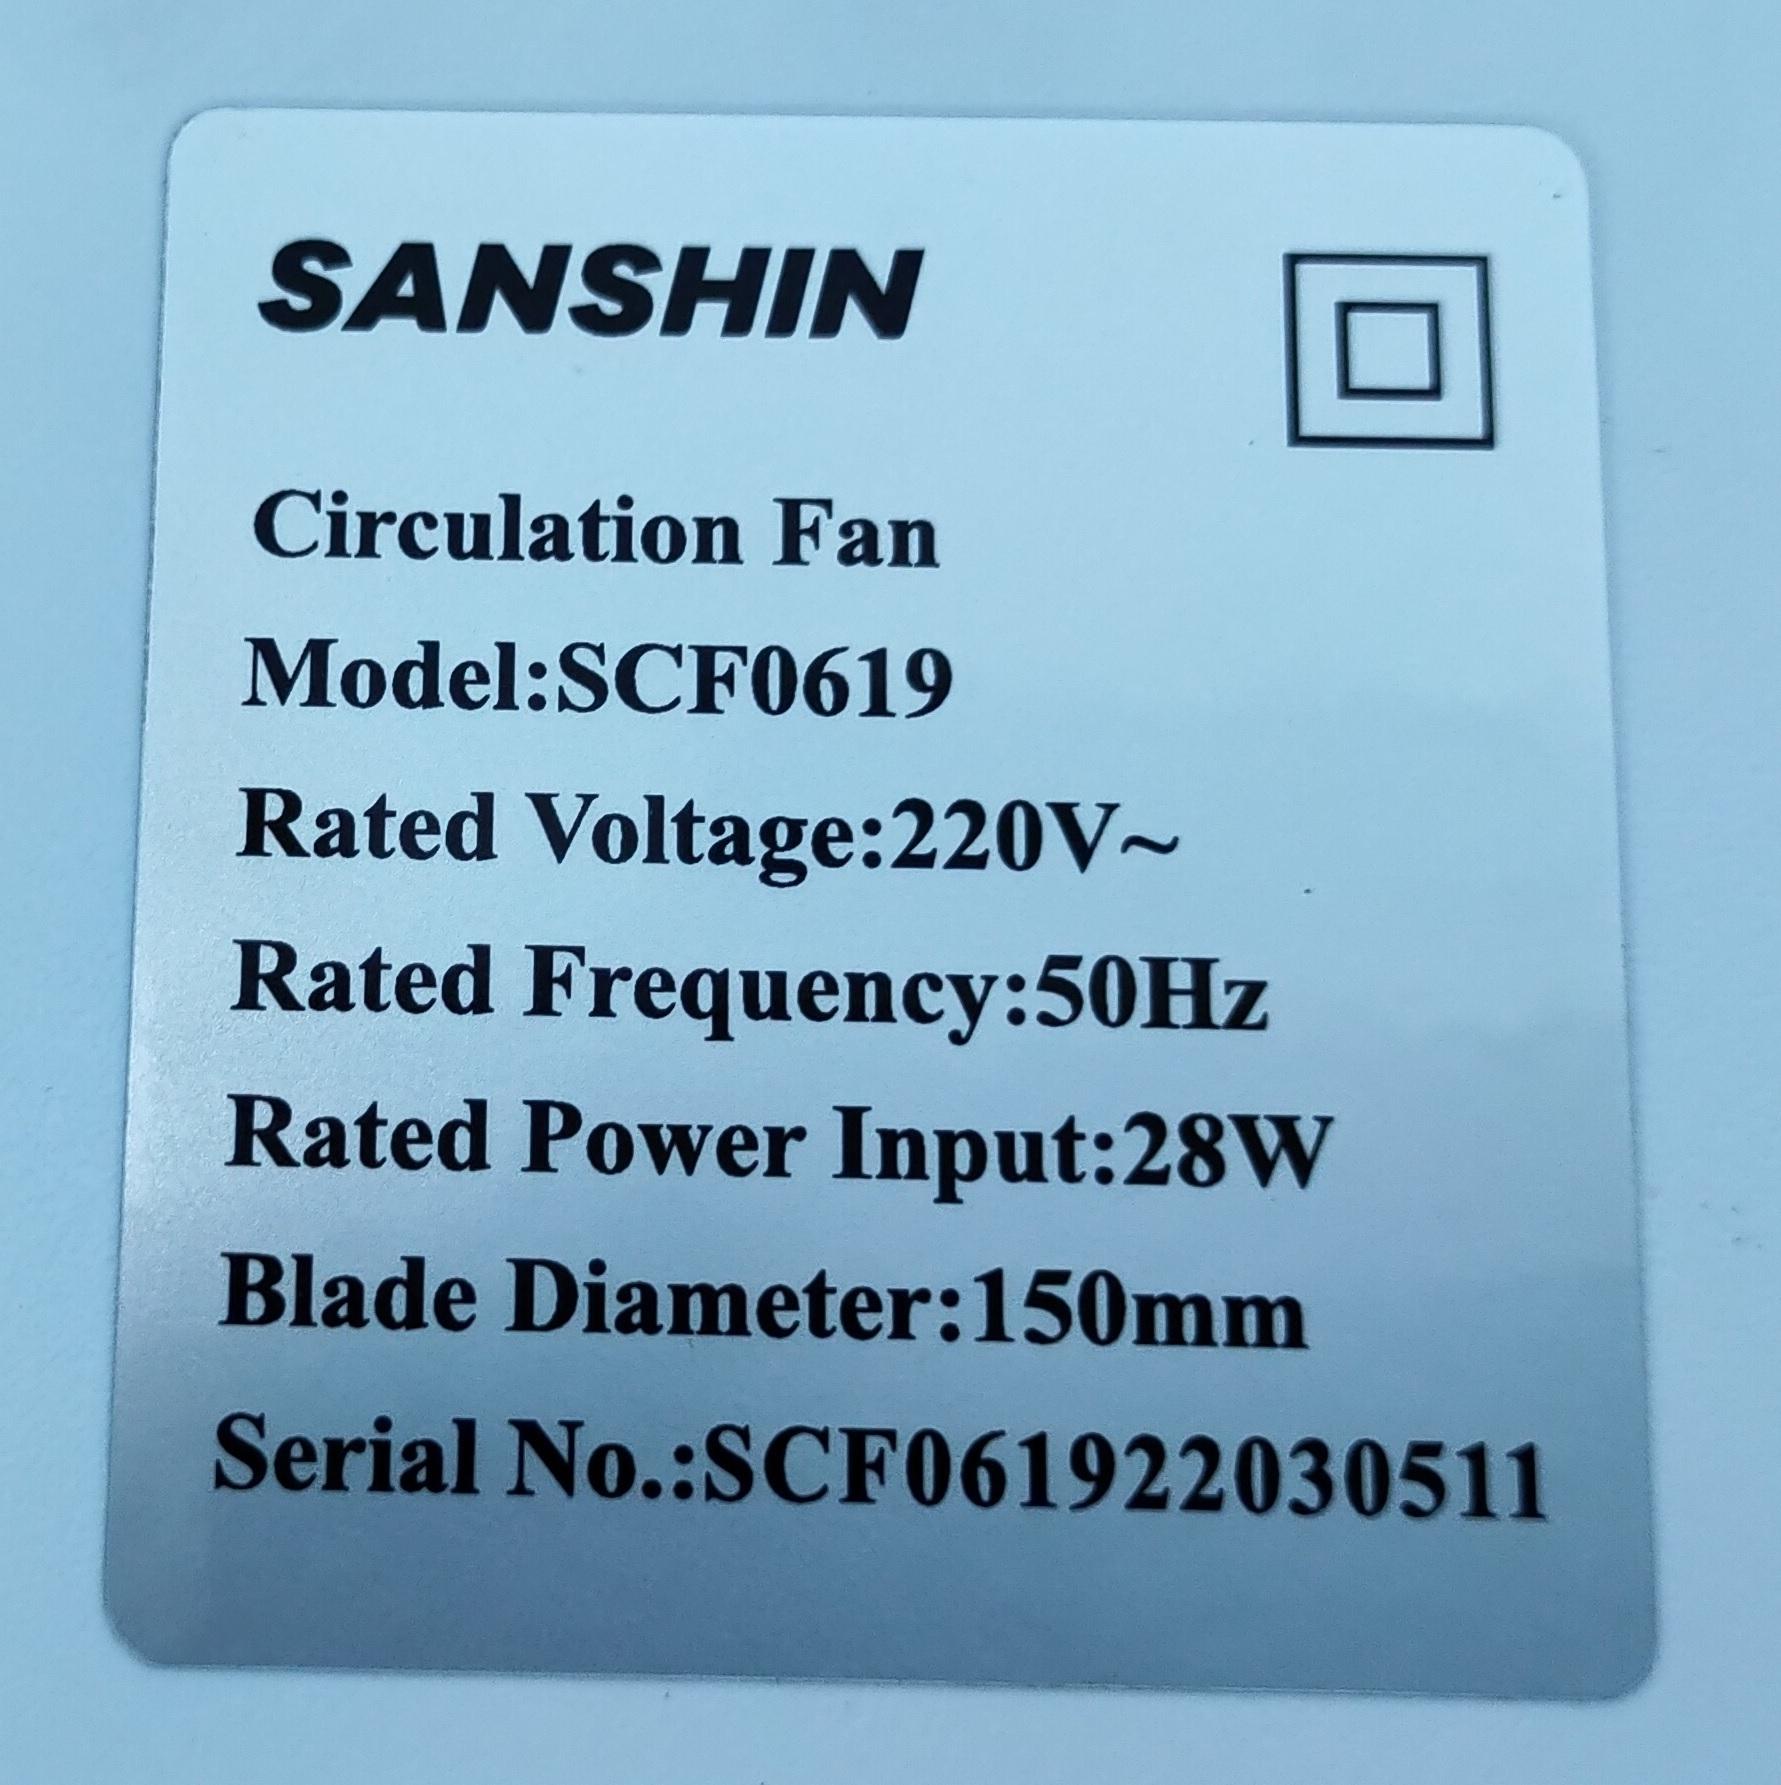 The Electrical and Mechanical Services Department today (June 14) urged the public to stop using a model of a Sanshin air circulator fan with the model number SCF0619. Photo shows its product markings.